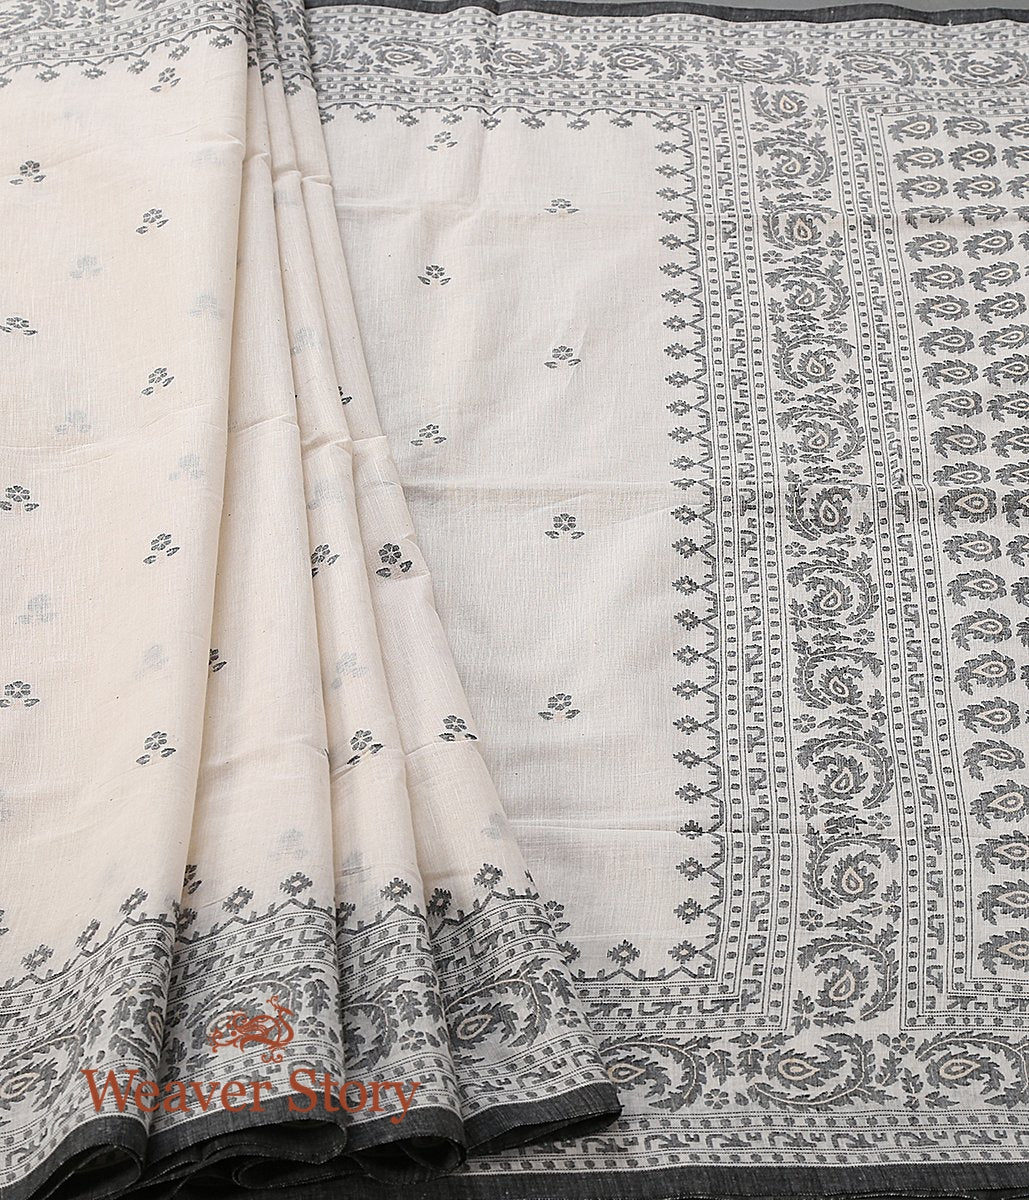 Hand_Spun_and_Hand_Woven_Pure_Cotton_Jamdani_Saree_in_White_with_Black_Thread_WeaverStory_03